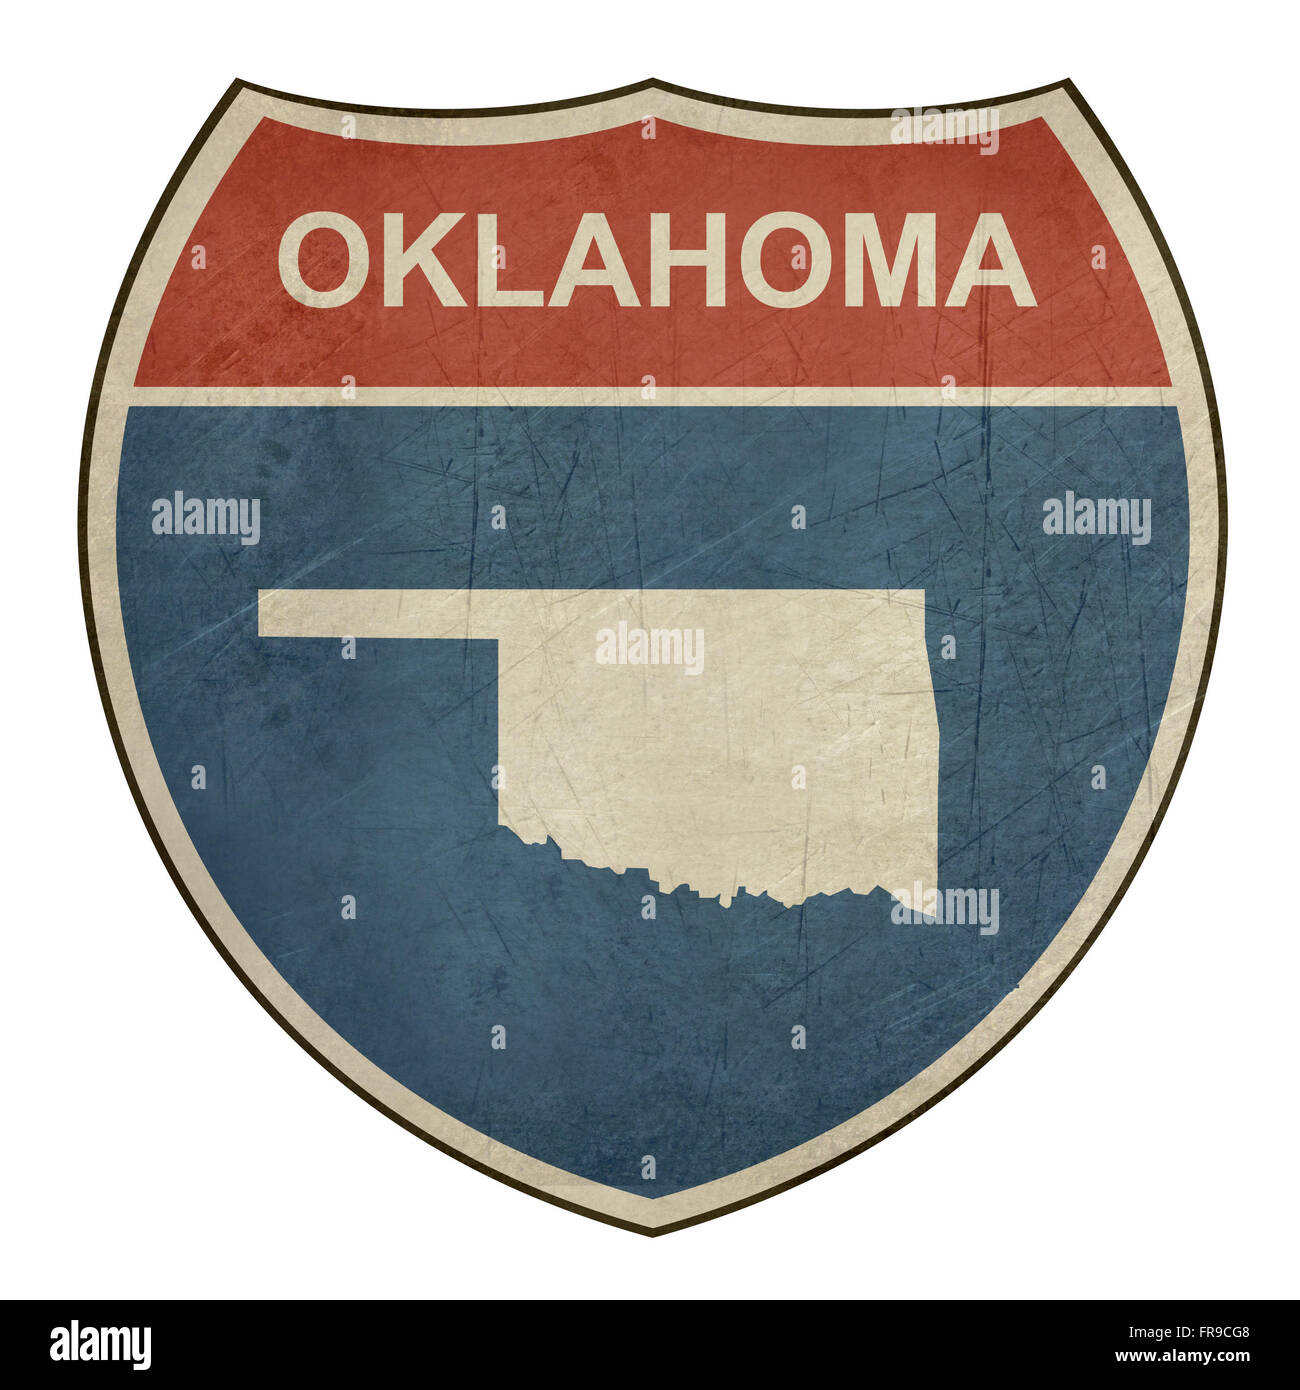 Grunge Oklahoma interstate highway road shield isolated on a white background. Stock Photo